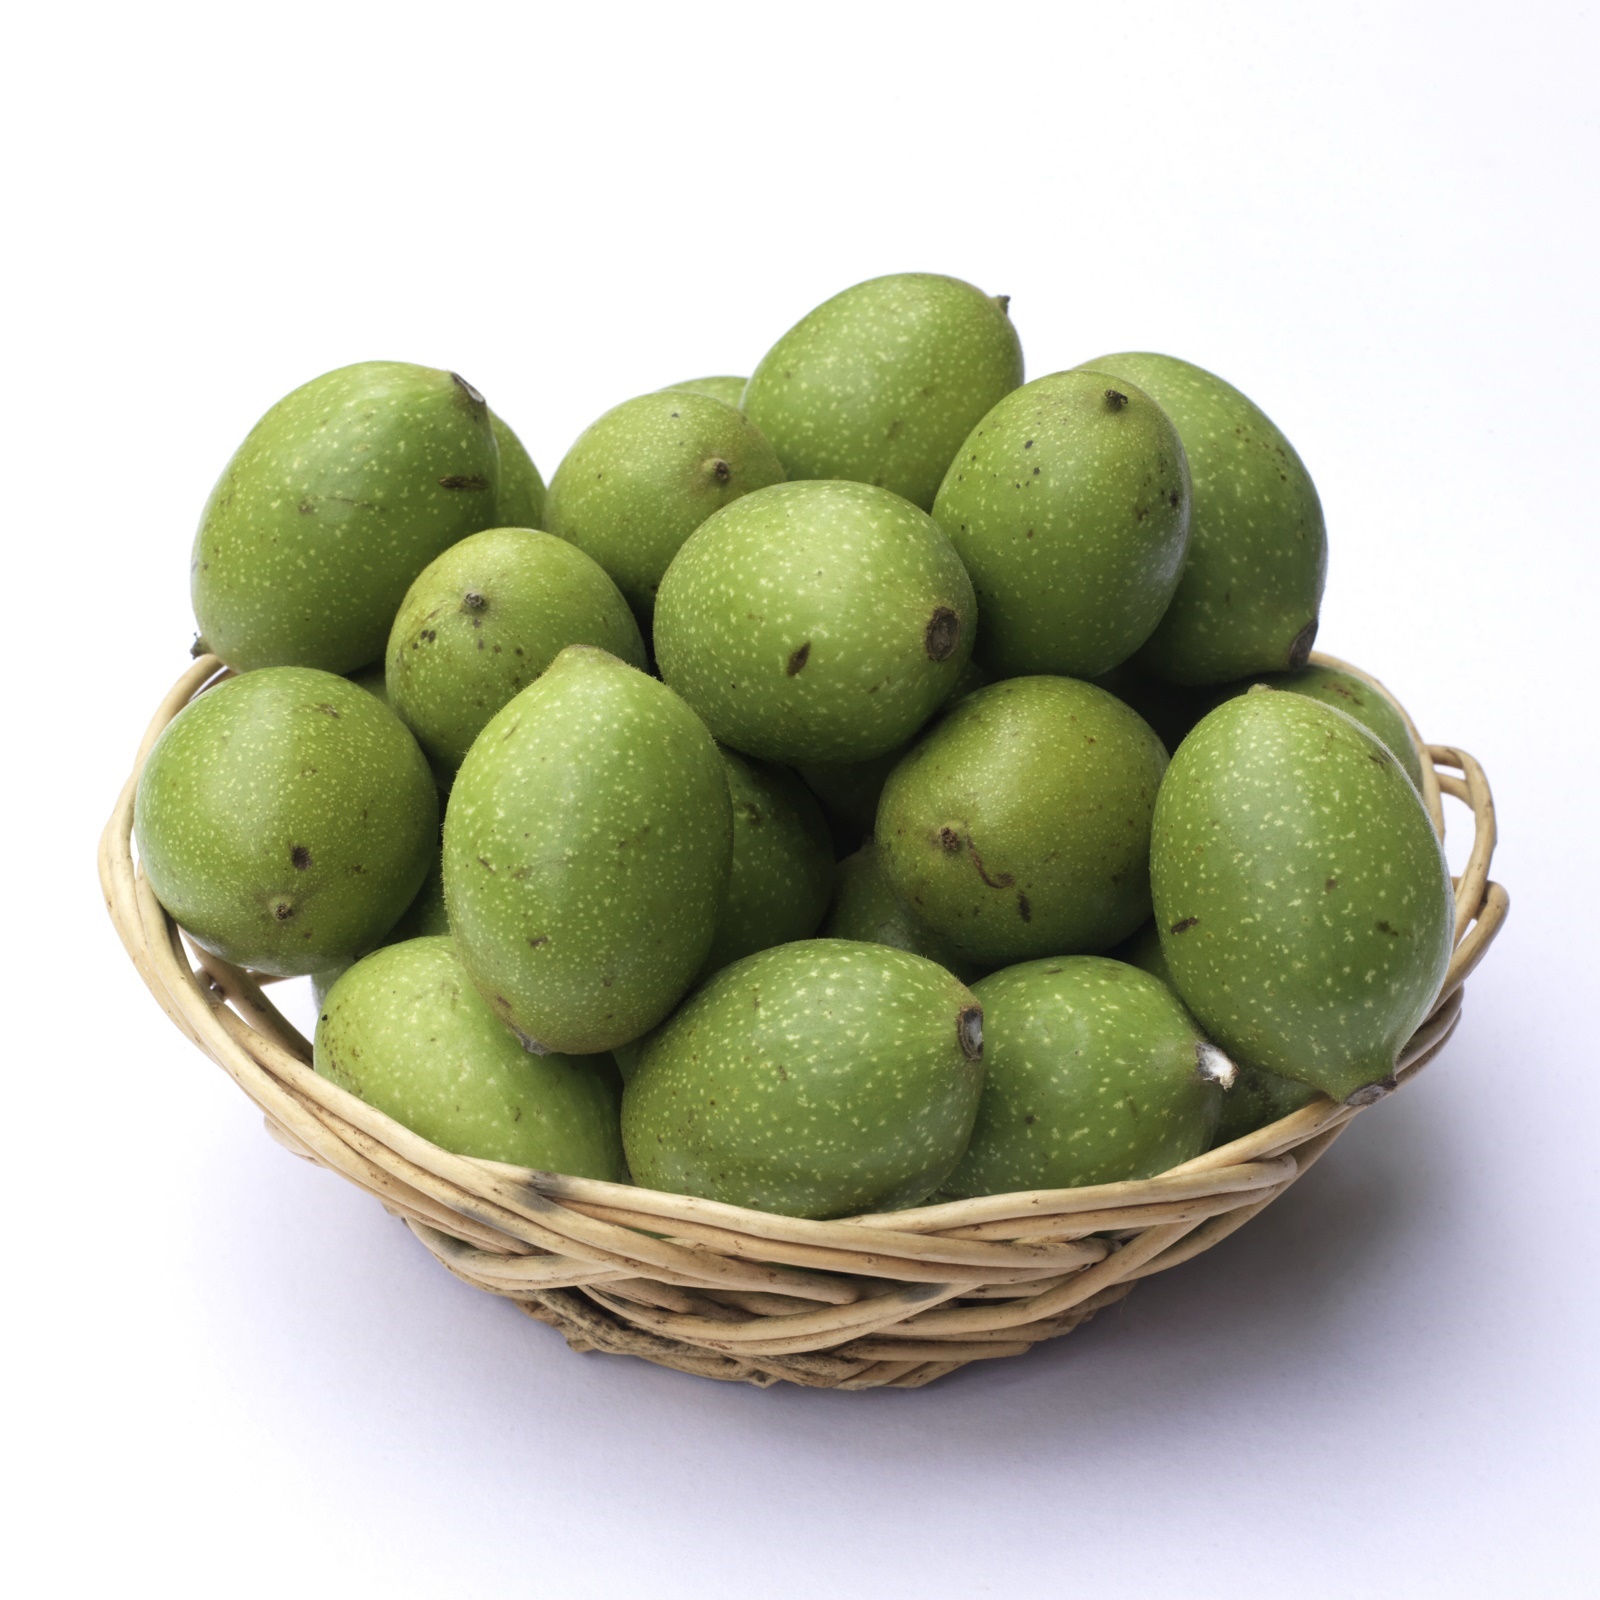 Fresh Green Walnuts for Pickling - The fresh green walnuts from Potash farm are available during a short seasonal two week window in July.